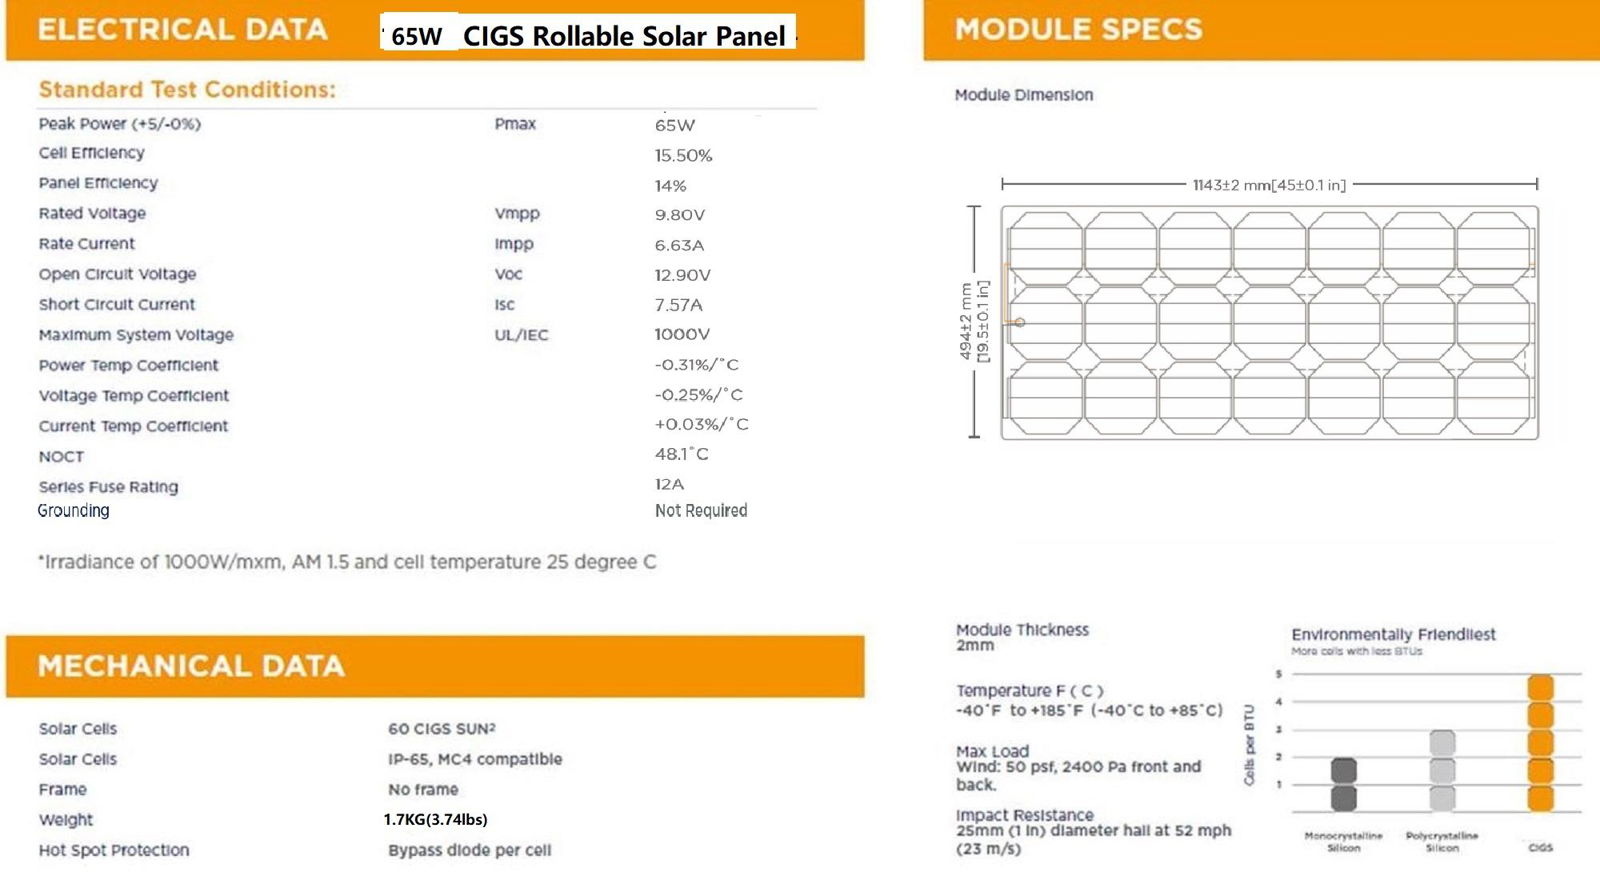 195W CIGS Rollable Solar Panel 4